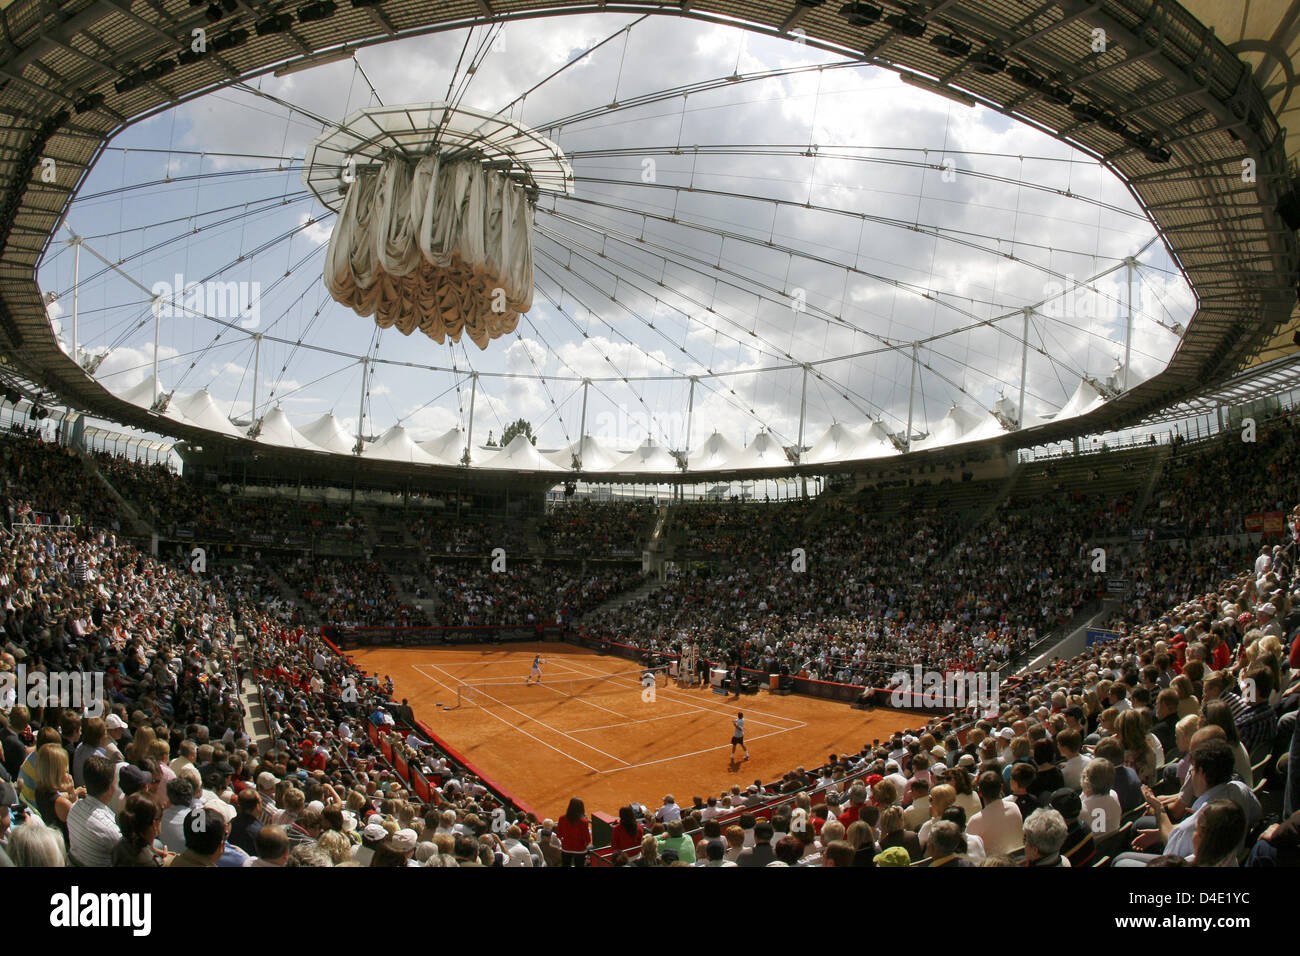 The picture shows the tennis stadium 'Am Rothenbaum' during the ATP Masters  Series final match between Swiss Federer and Spanish Nadal in Hamburg,  Germany, 18 May 2008. Photo: MAURIZIO GAMBARINI Stock Photo - Alamy